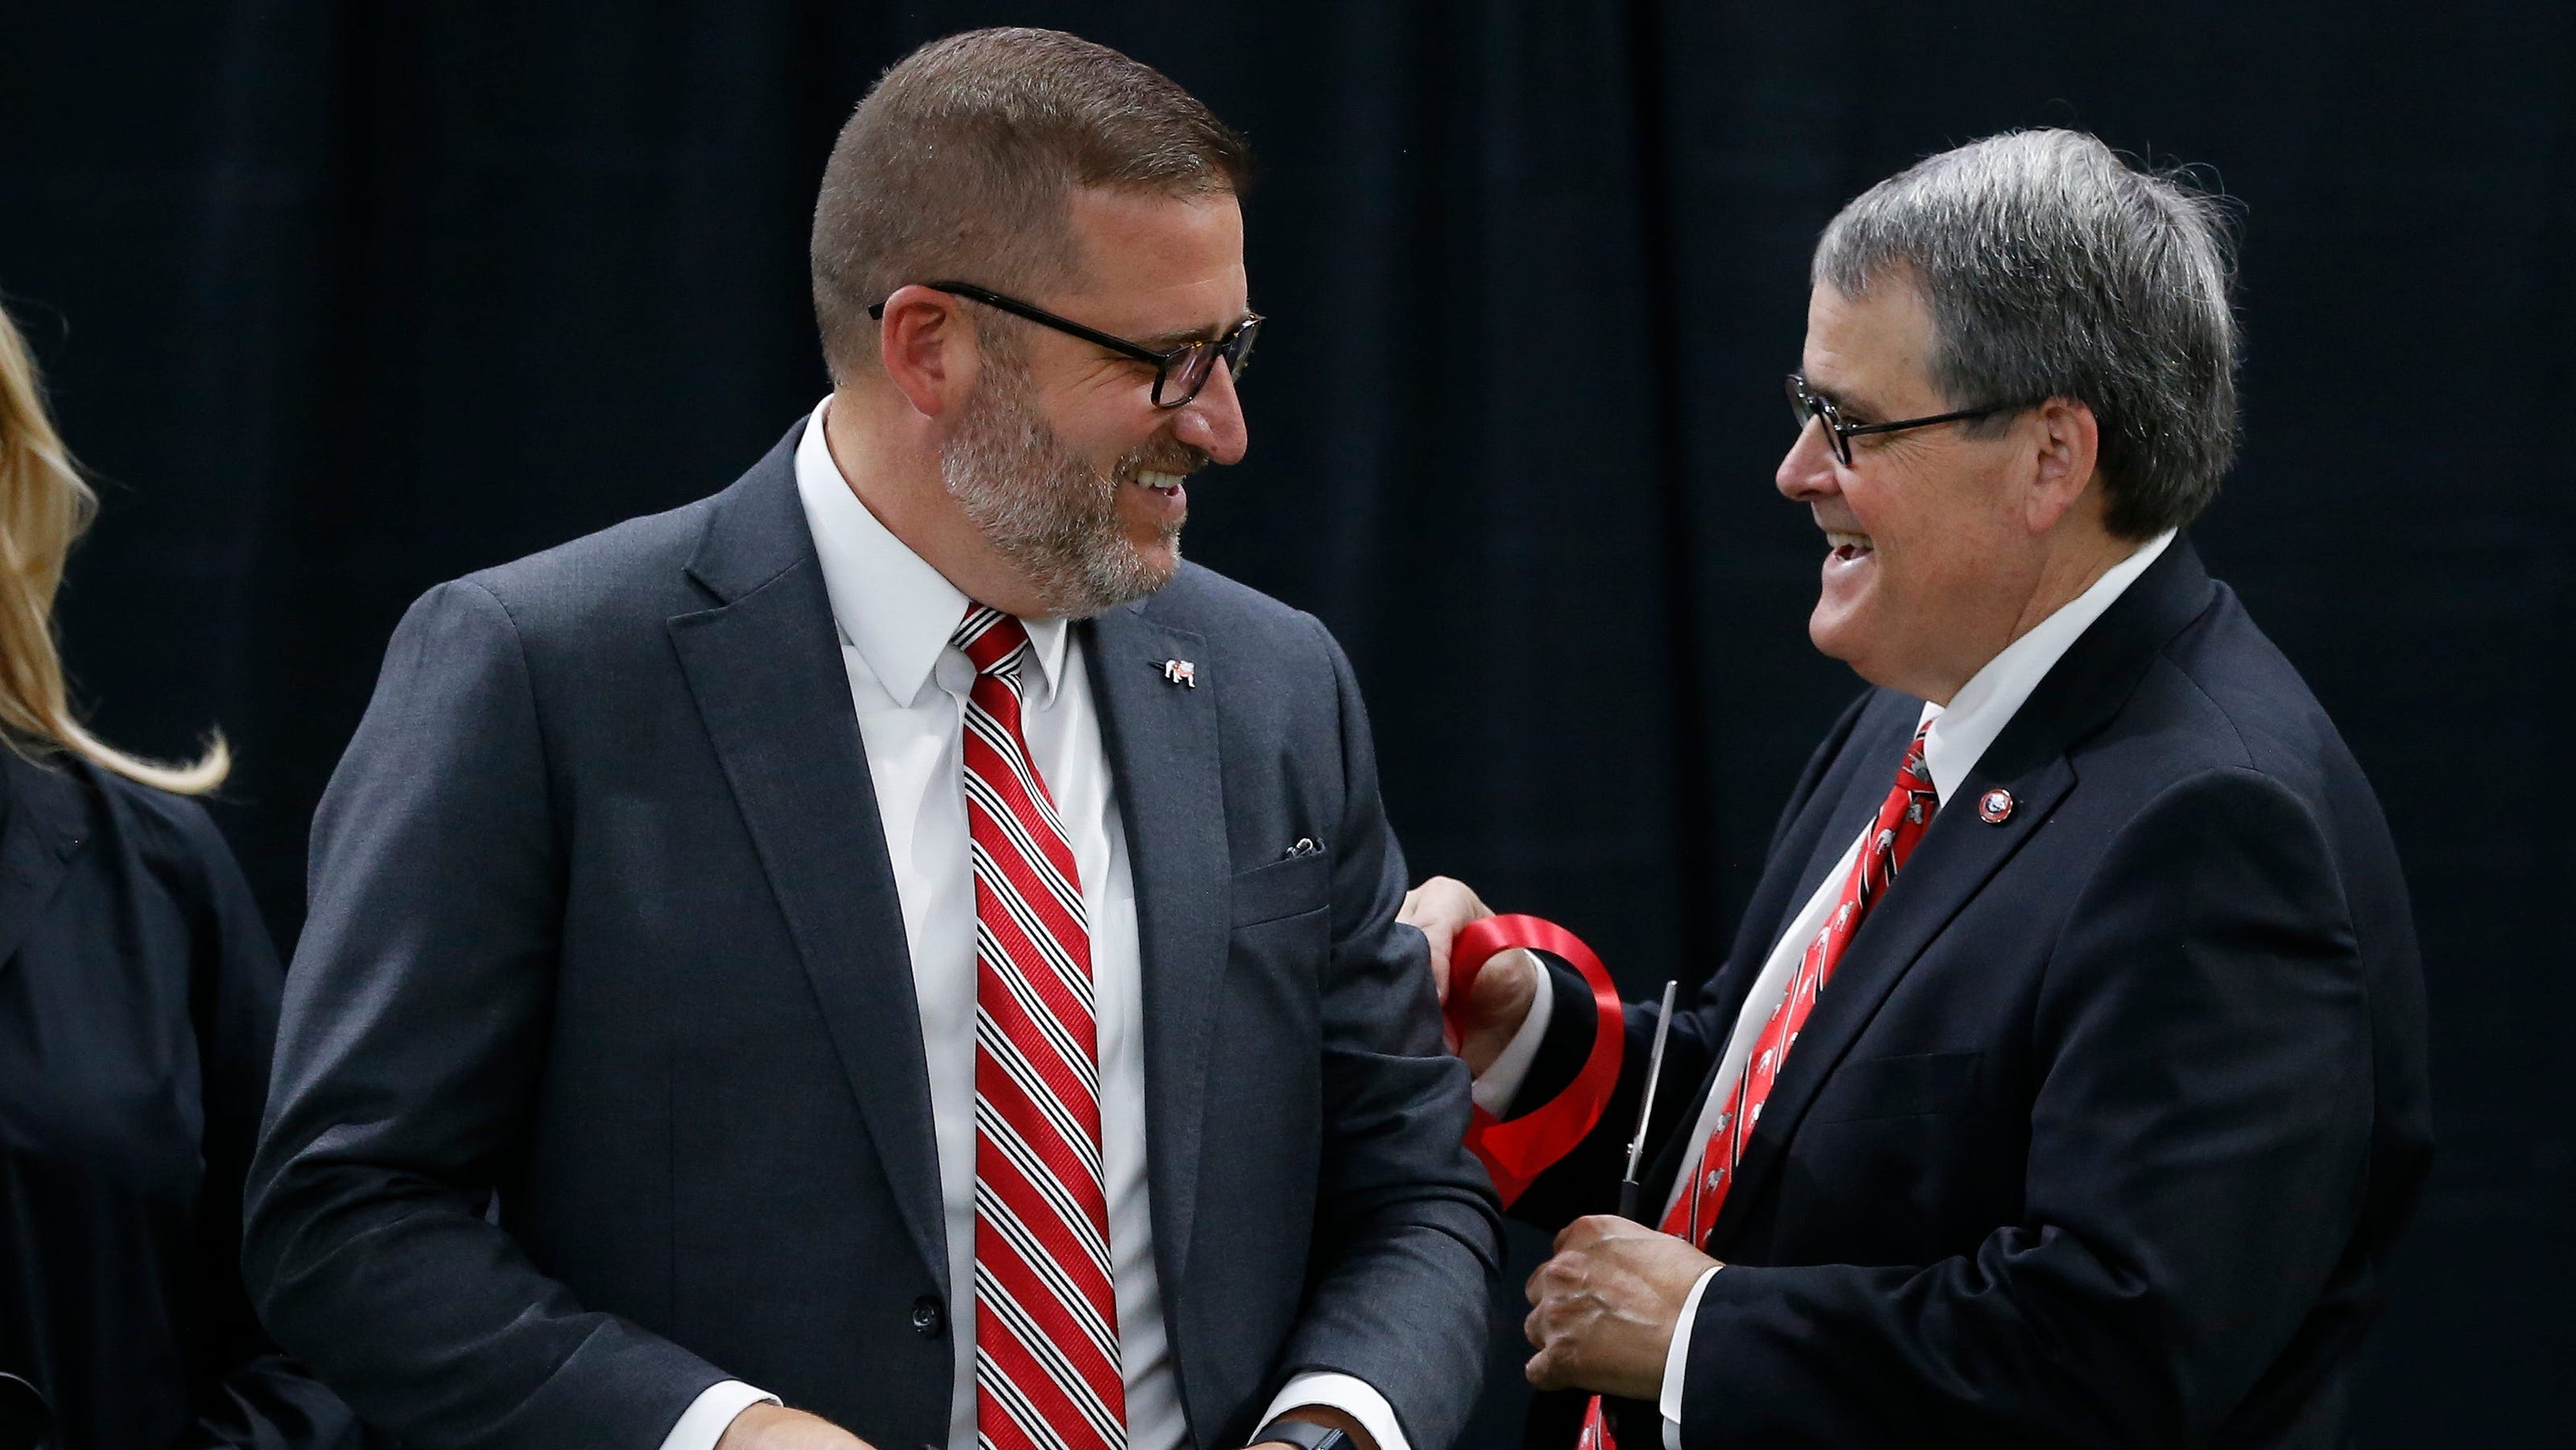 UGA athletic board meets as college athletics undergoing seismic shift